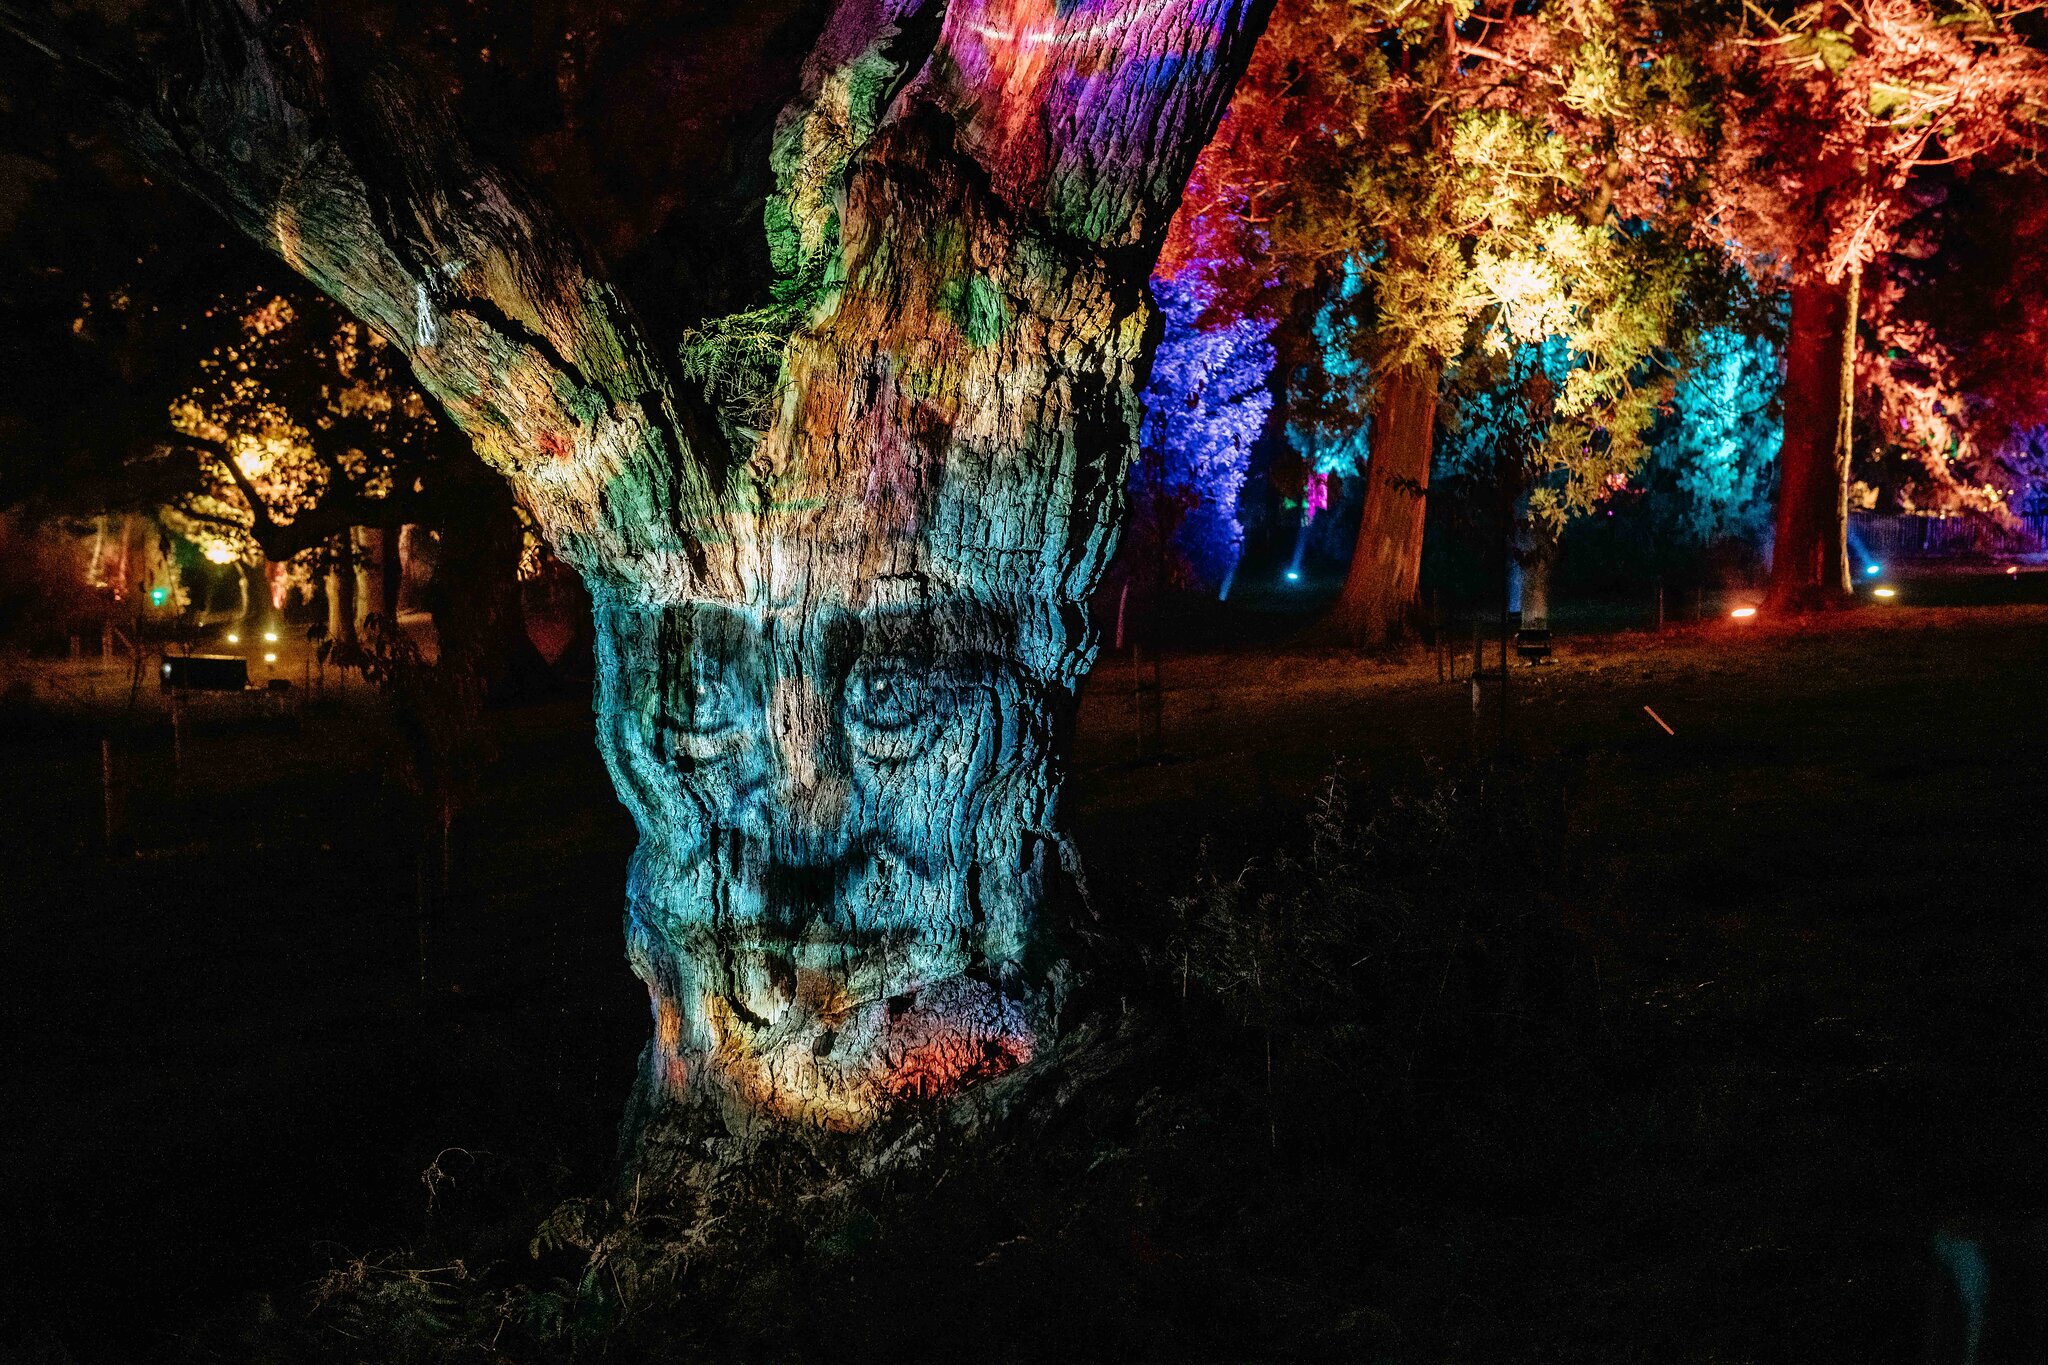 Windsor Great Park Illuminated, a hologram of a face on a tree with colourful lights in the background.